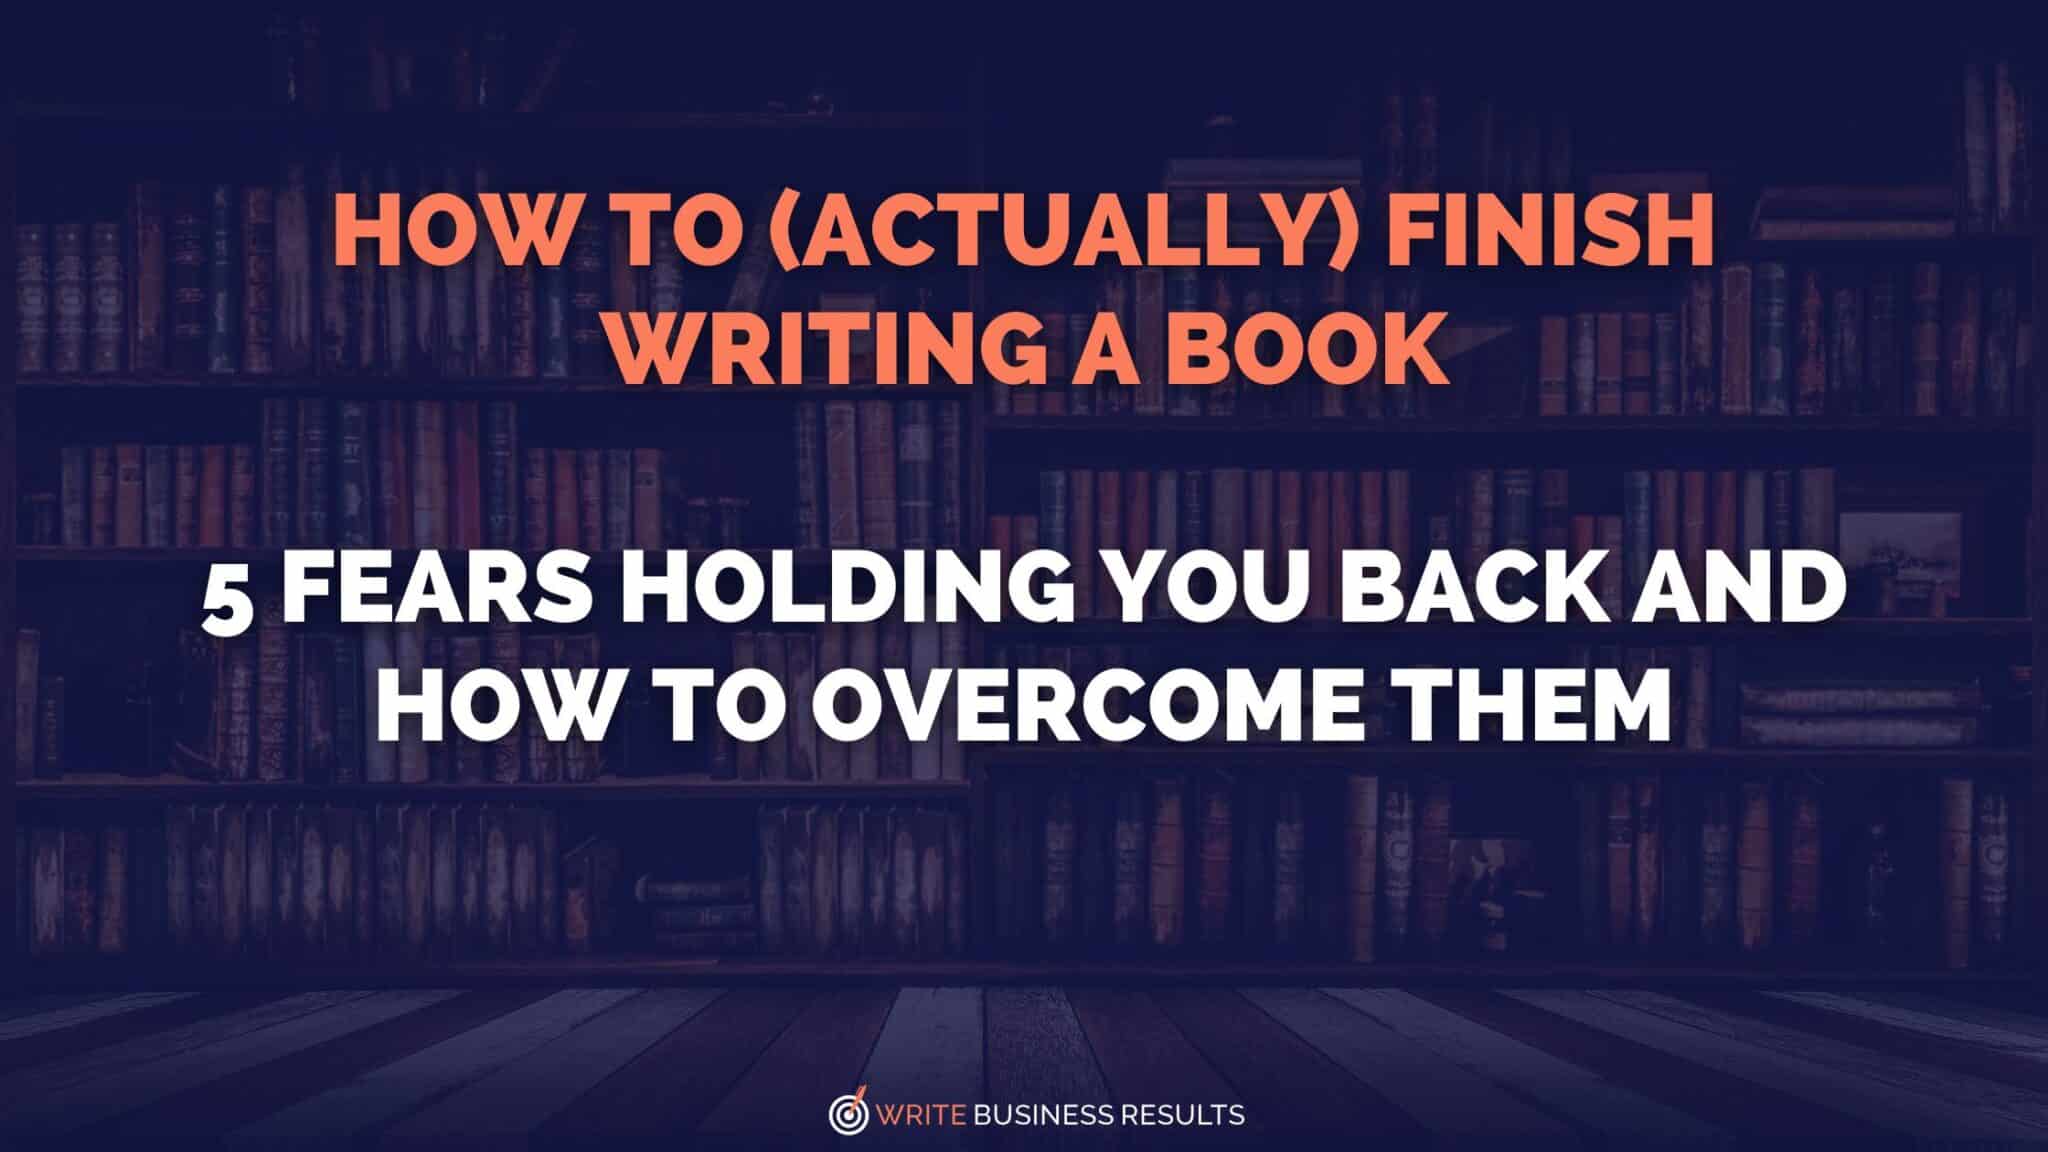 How To (Actually) Finish Writing A Book: 5 Fears Holding You Back And How To Overcome Them